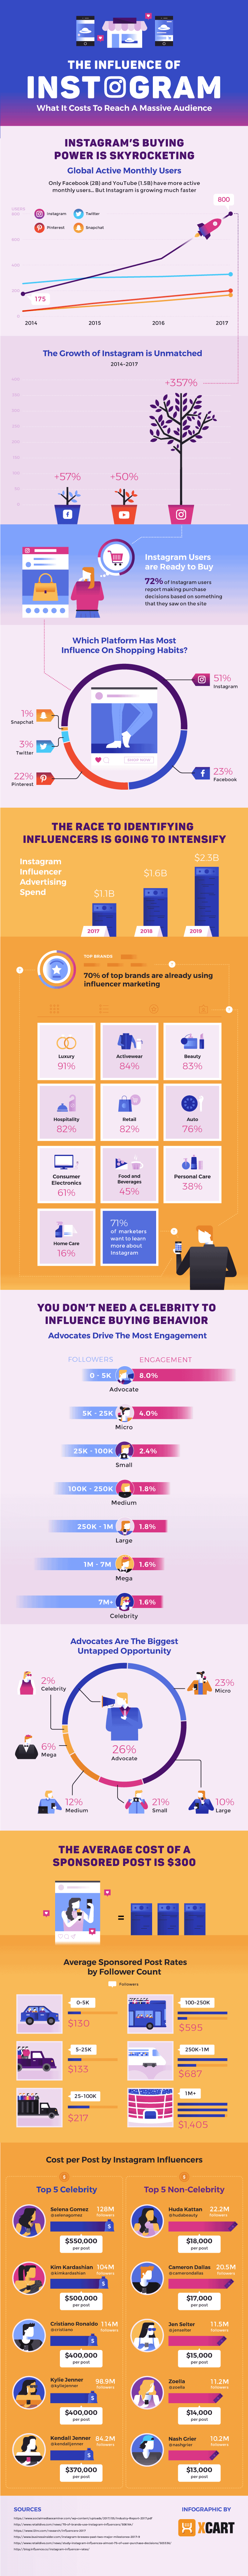 infographic describes why instagram marketing is the future of influencer marketing